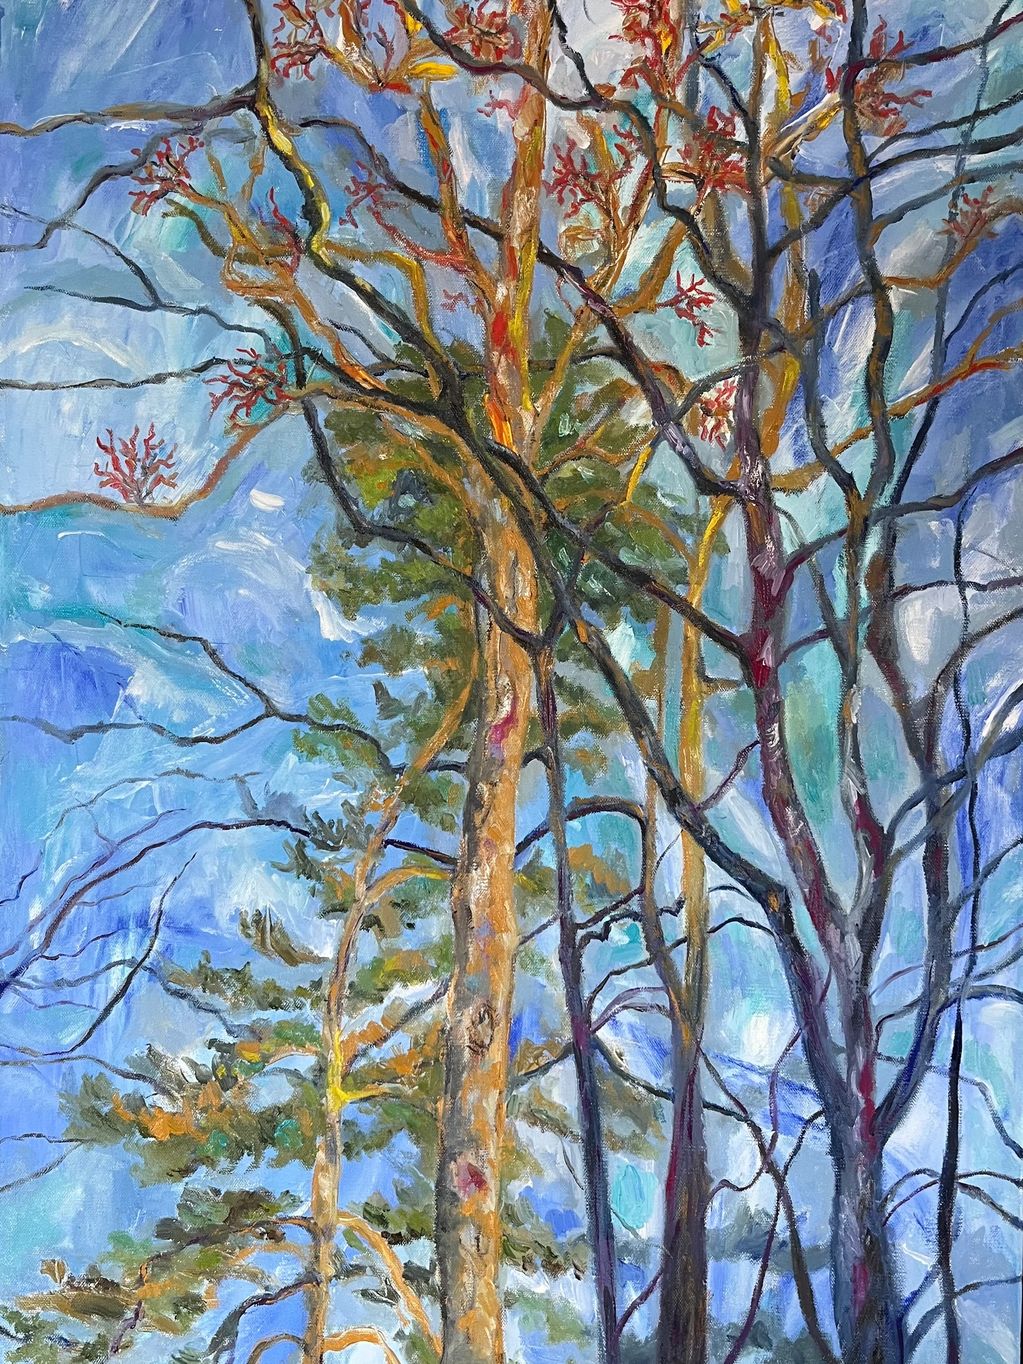 A painting of contours of branches in front of a blue sky.